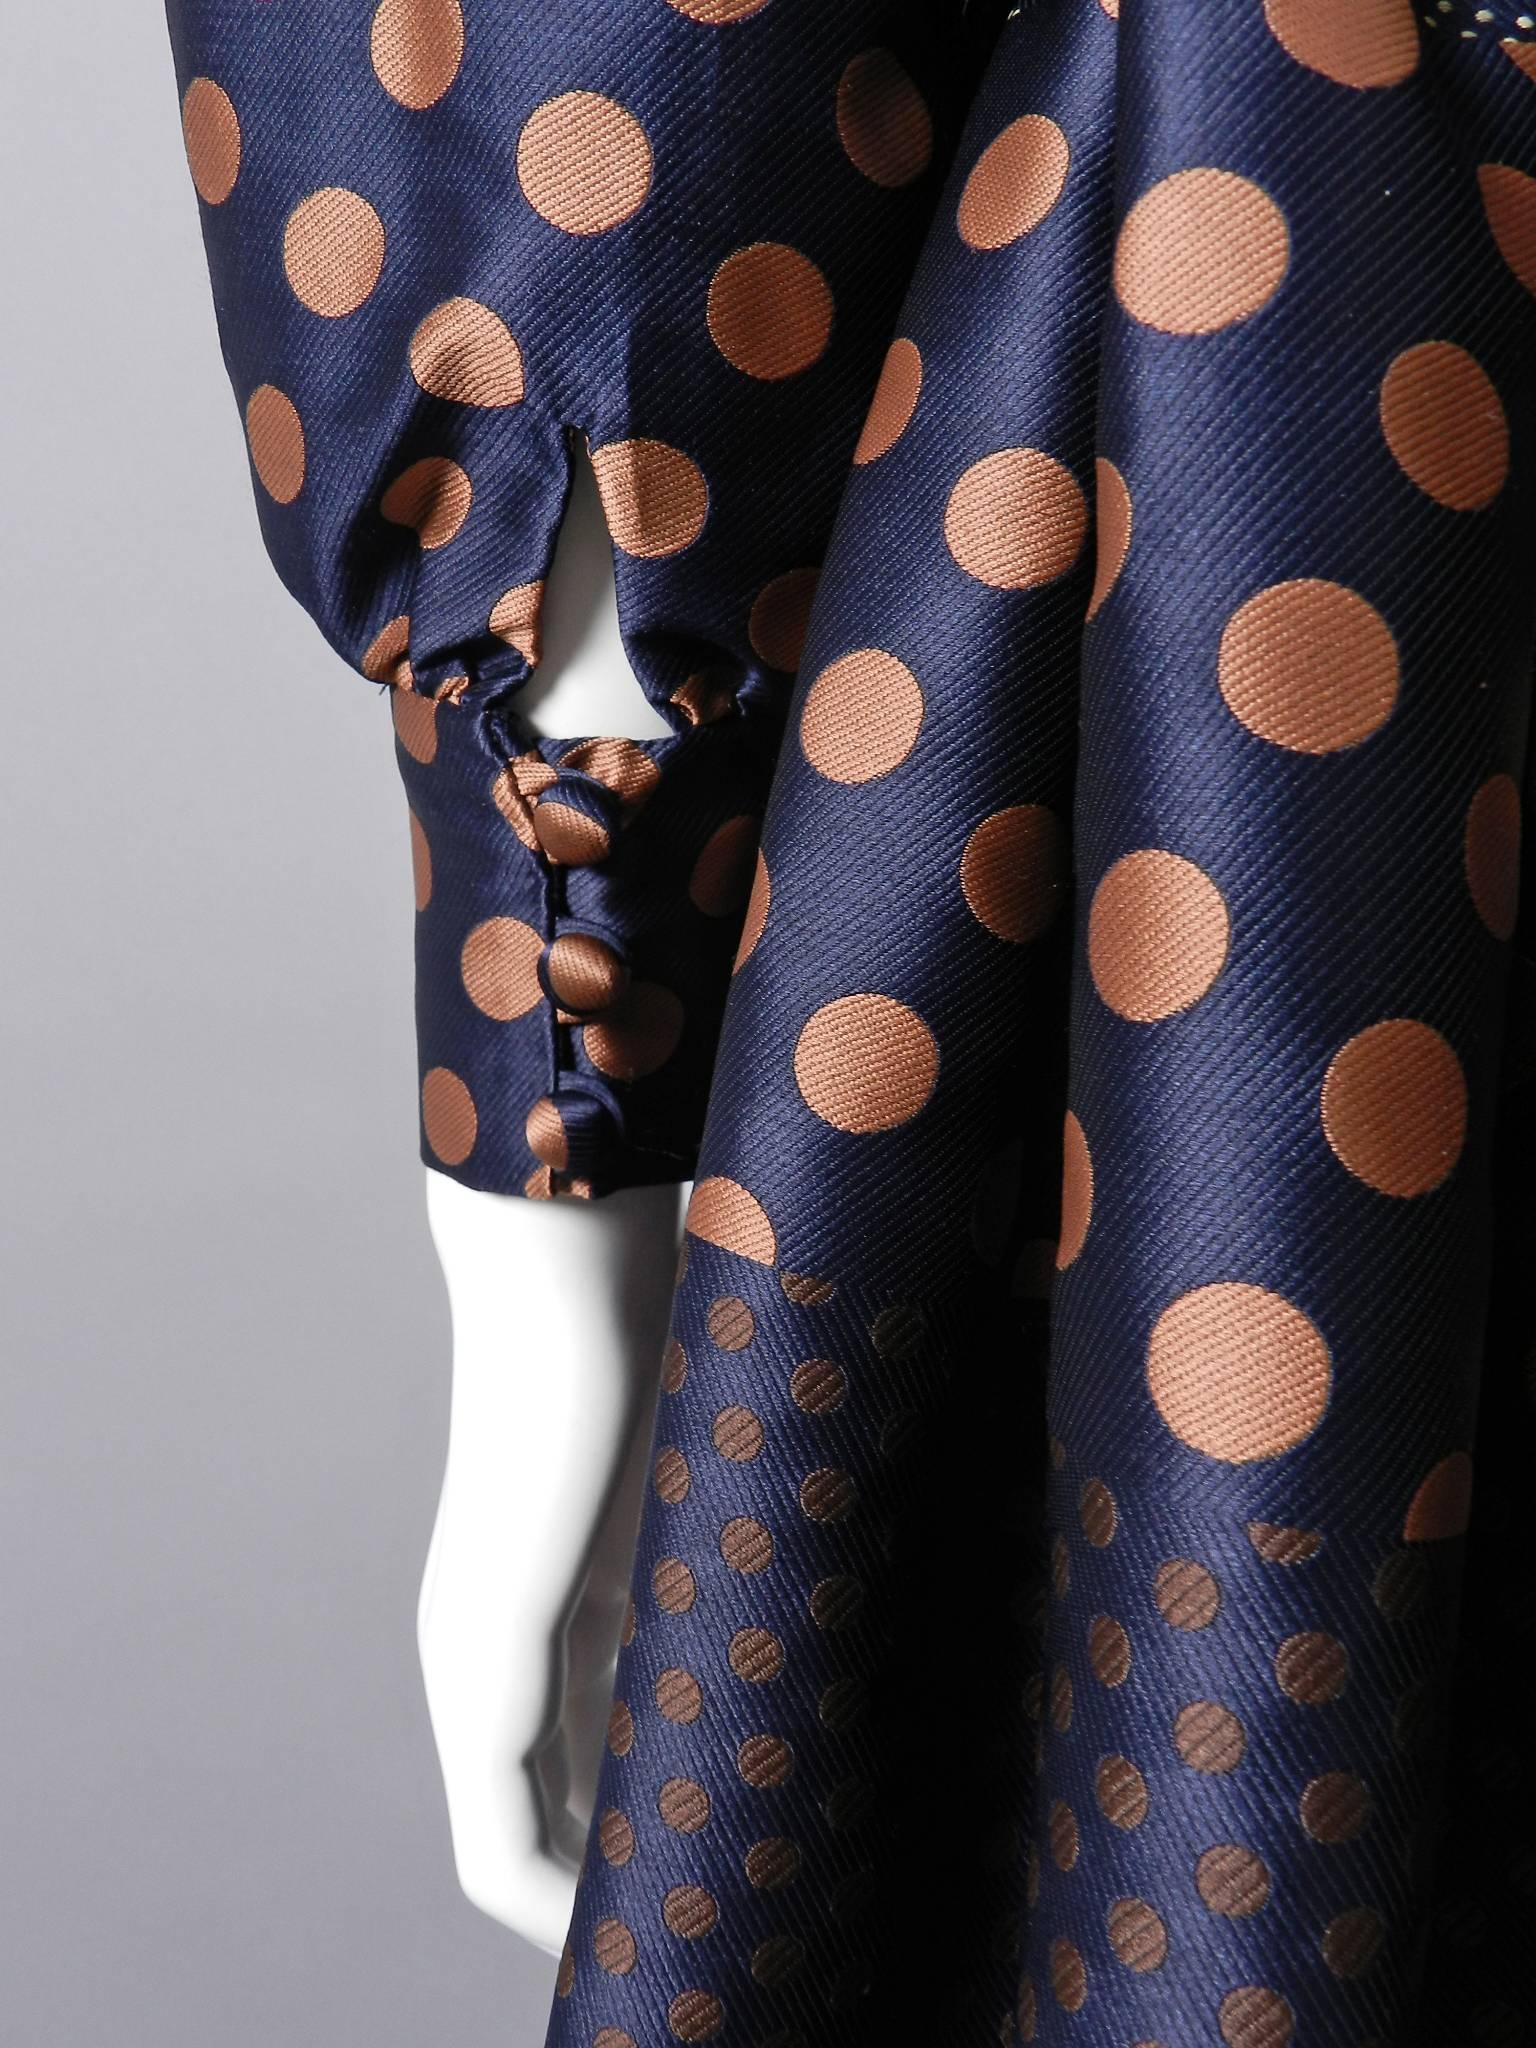 Geoffrey Beene 1970's Polkadot Gown with bow at Neck For Sale 1